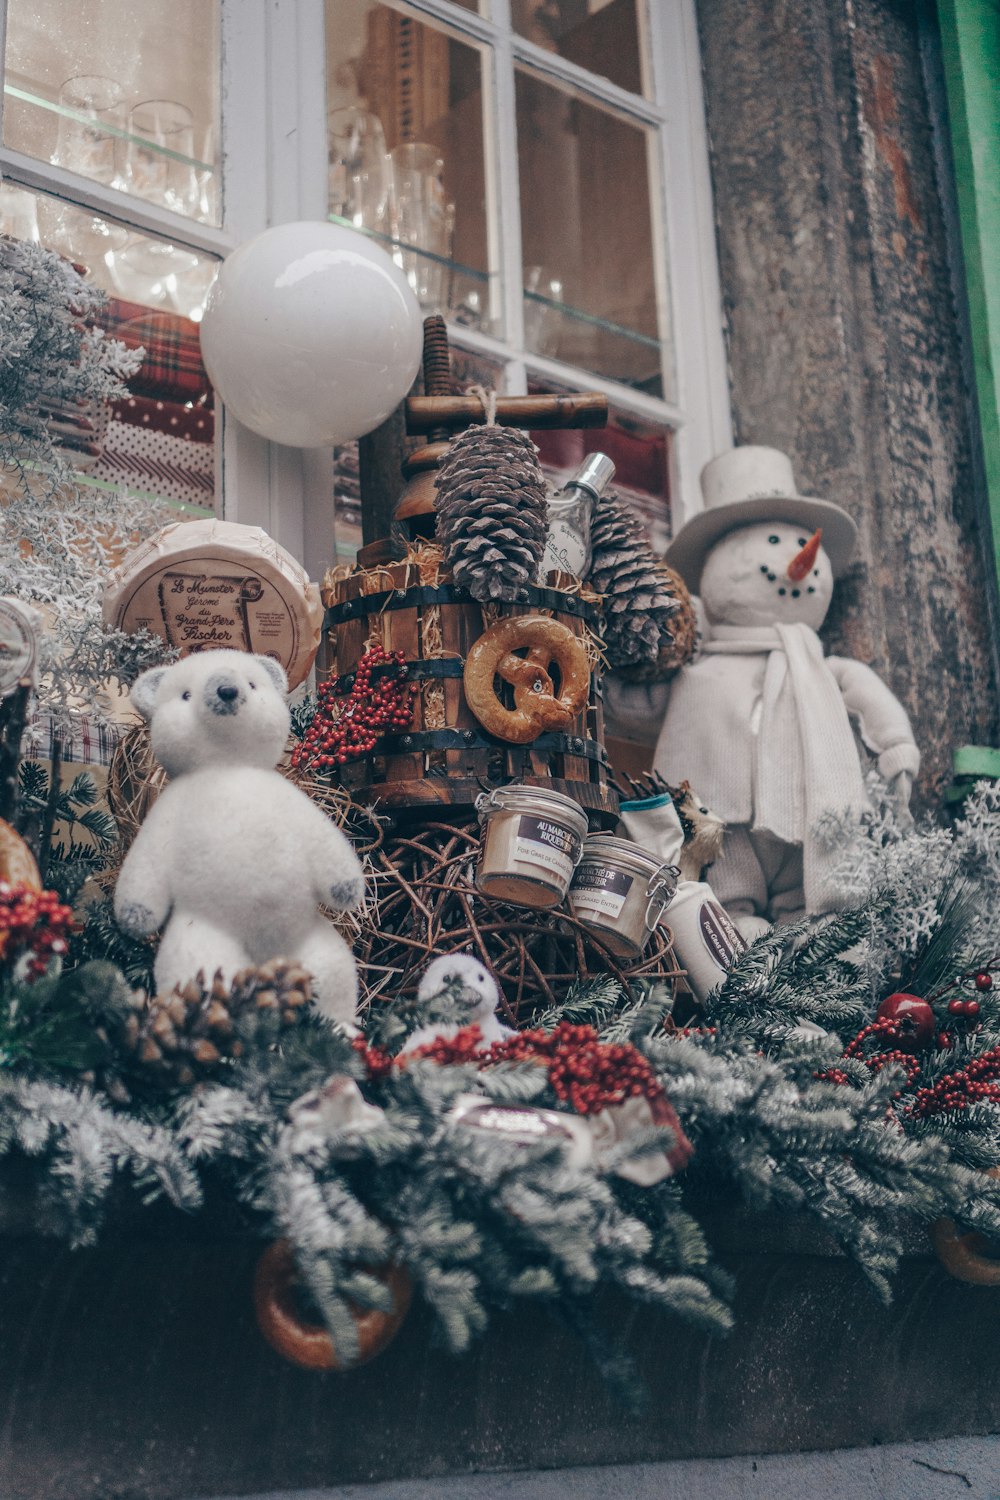 a window display with teddy bears and christmas decorations